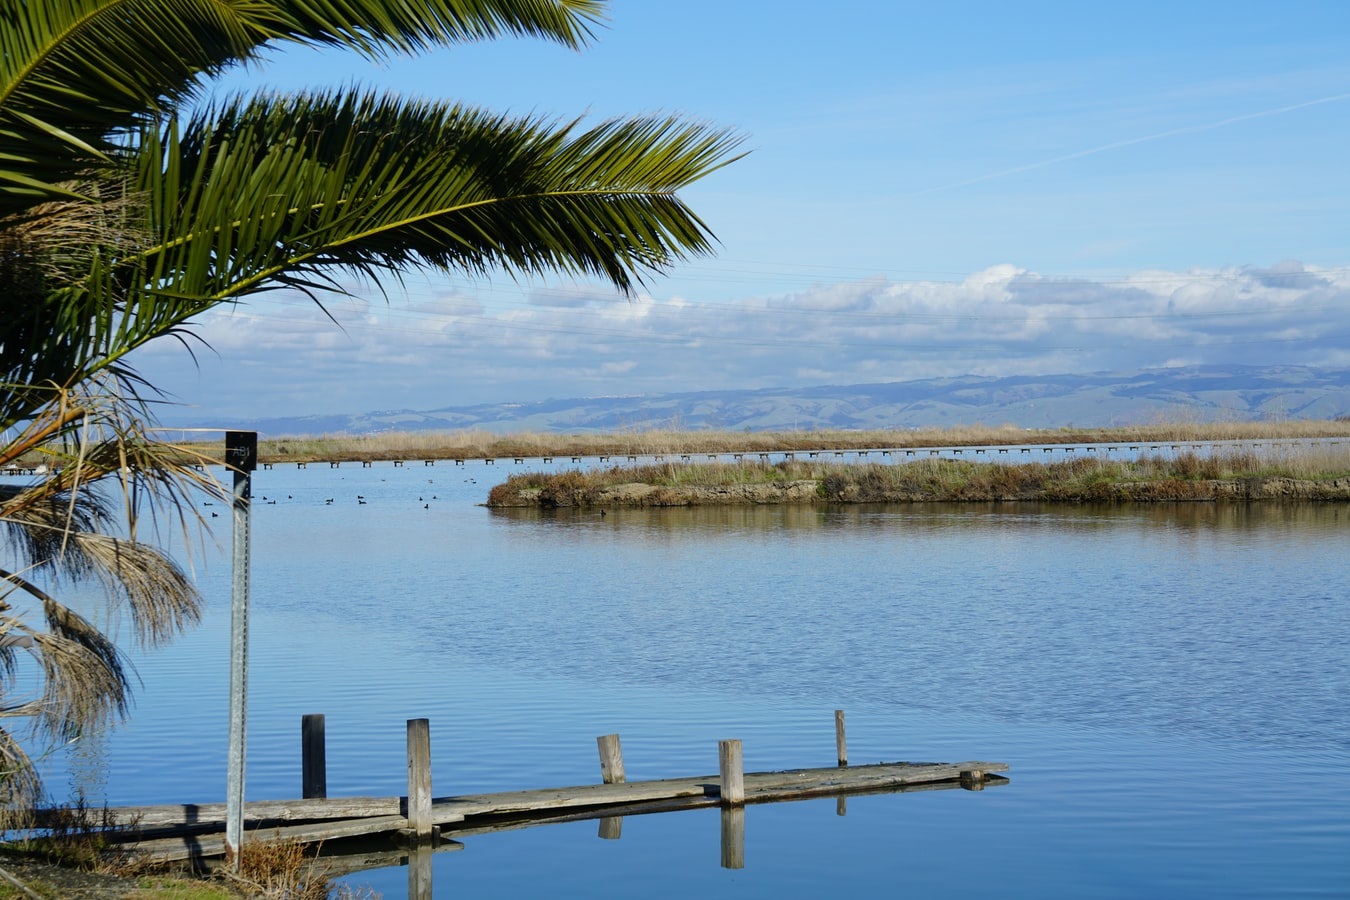 View from the shore of the wetlands with an old wooden dock in the foreground, multiple sea birds floating on the water and a peninsula with marsh grasses in the distance